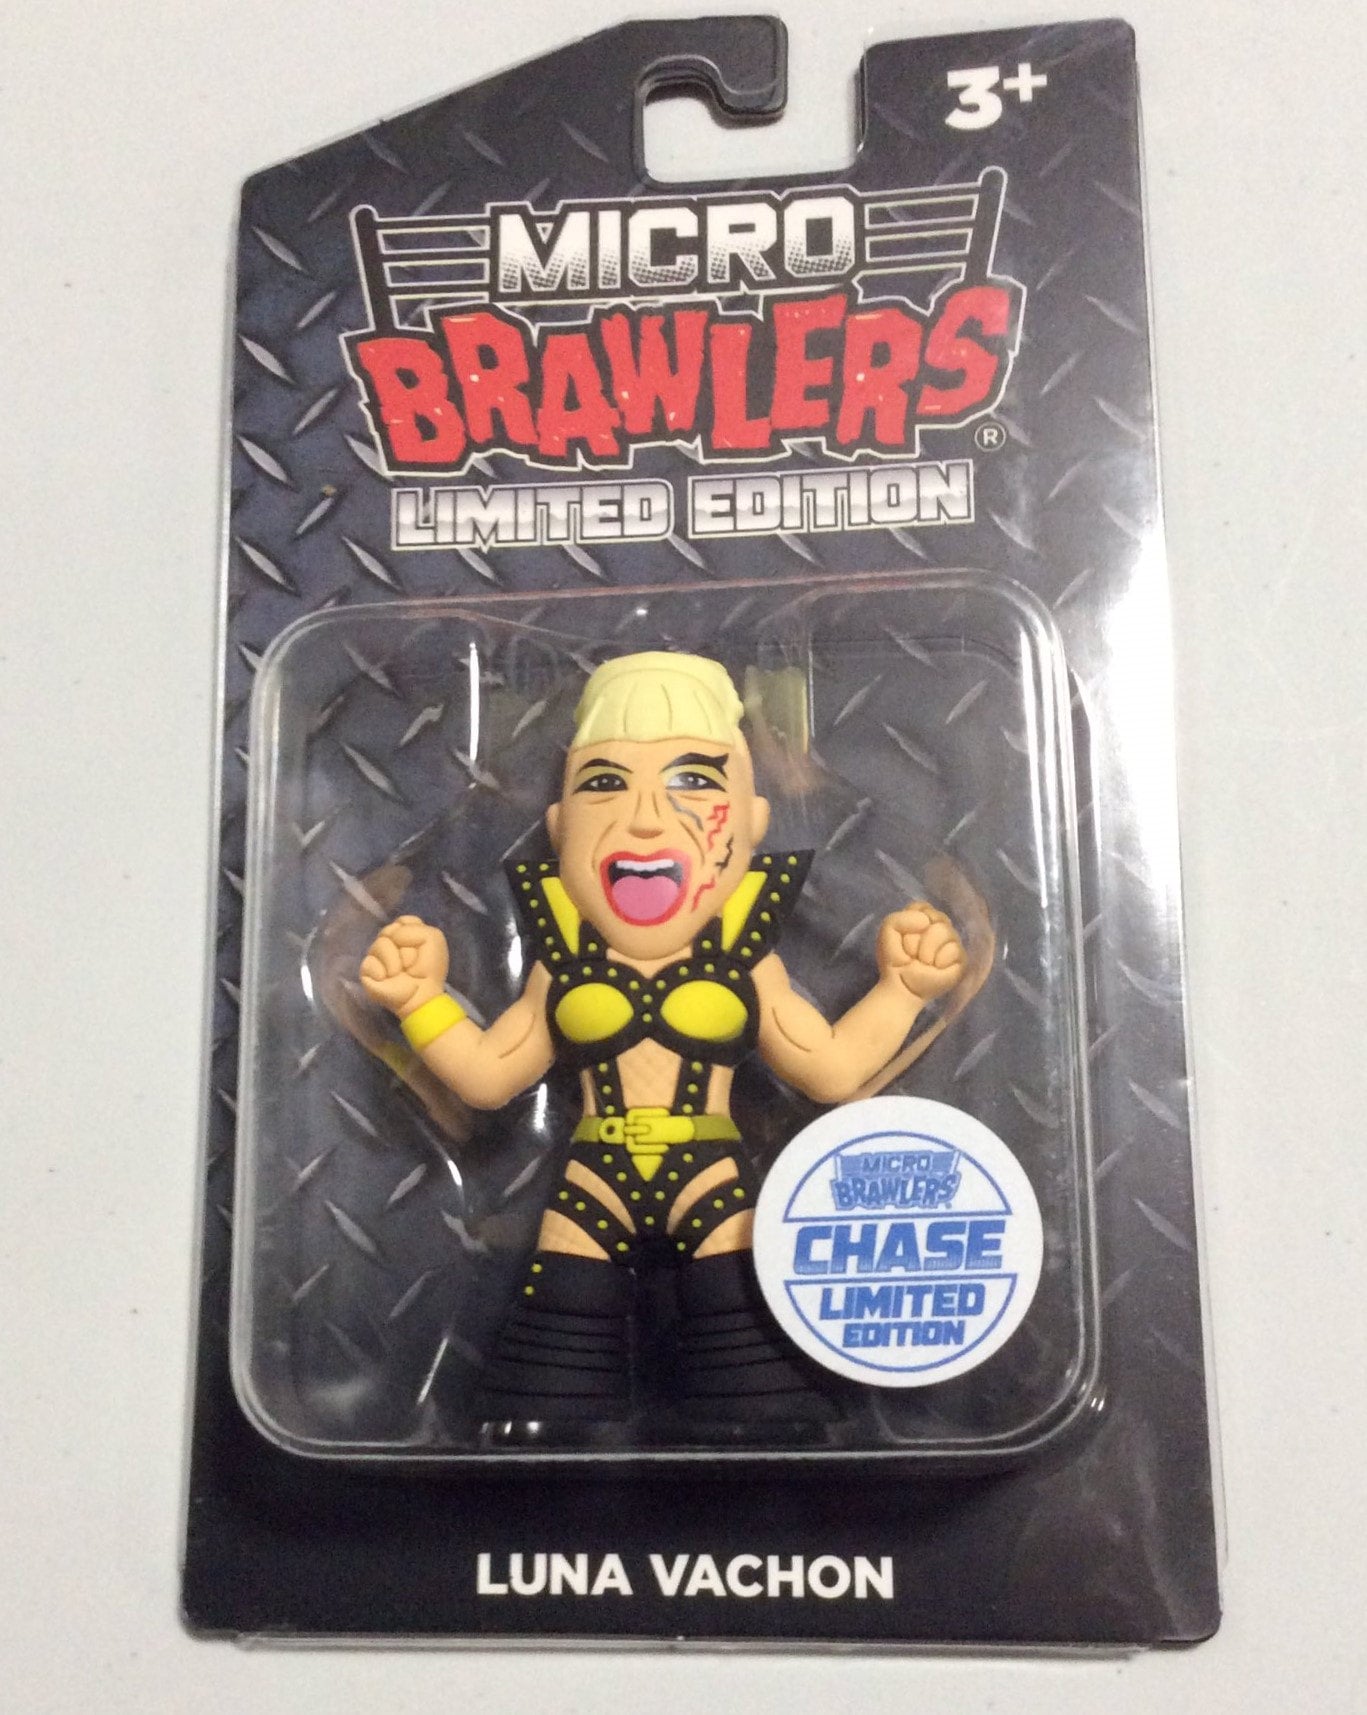 Pro Wrestling Tees Micro Brawlers Limited Edition Luna Vachon [Chase]